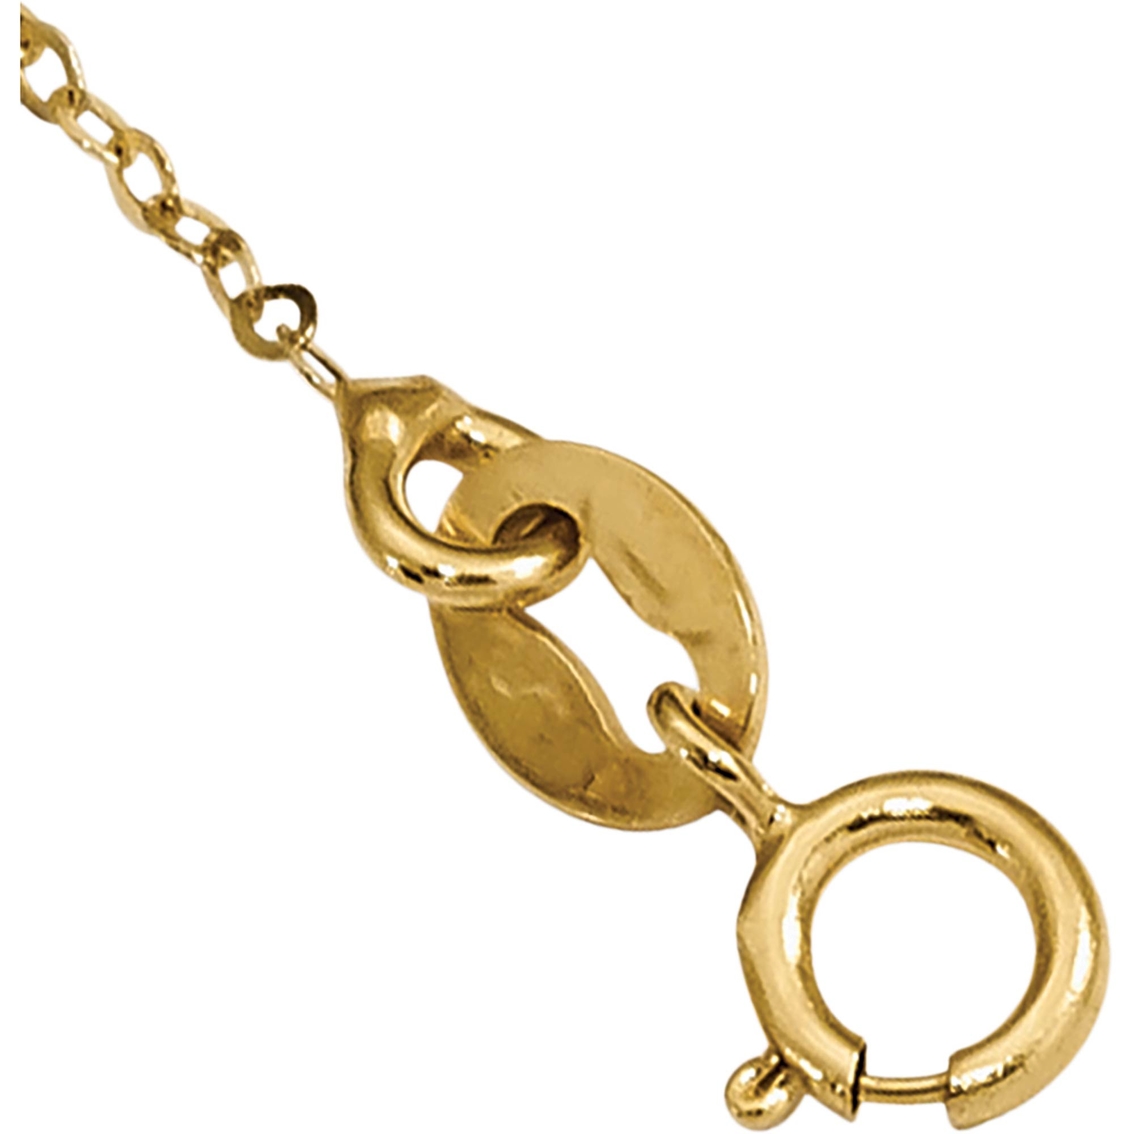 14K Yellow Gold Puffed Heart Necklace 18 in. - Image 2 of 2